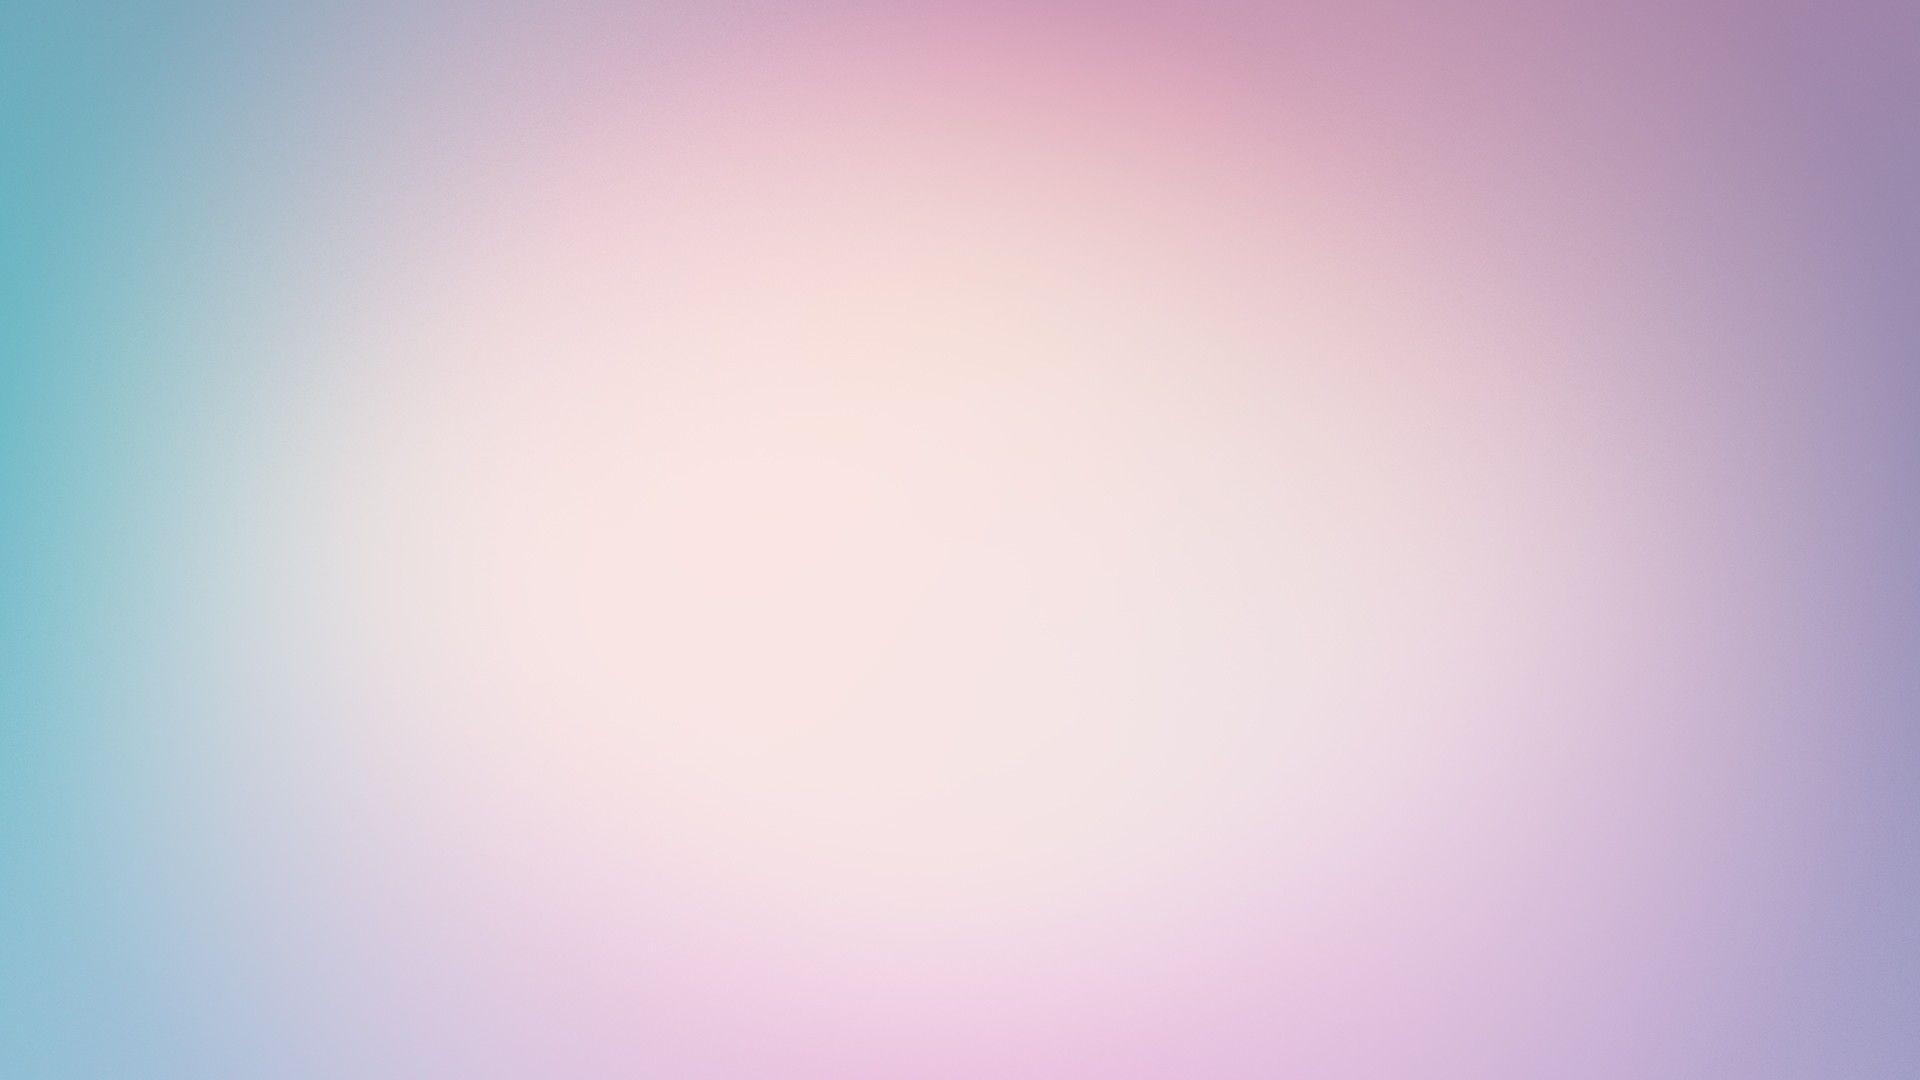 light color plain background image HD 1. Background Check All